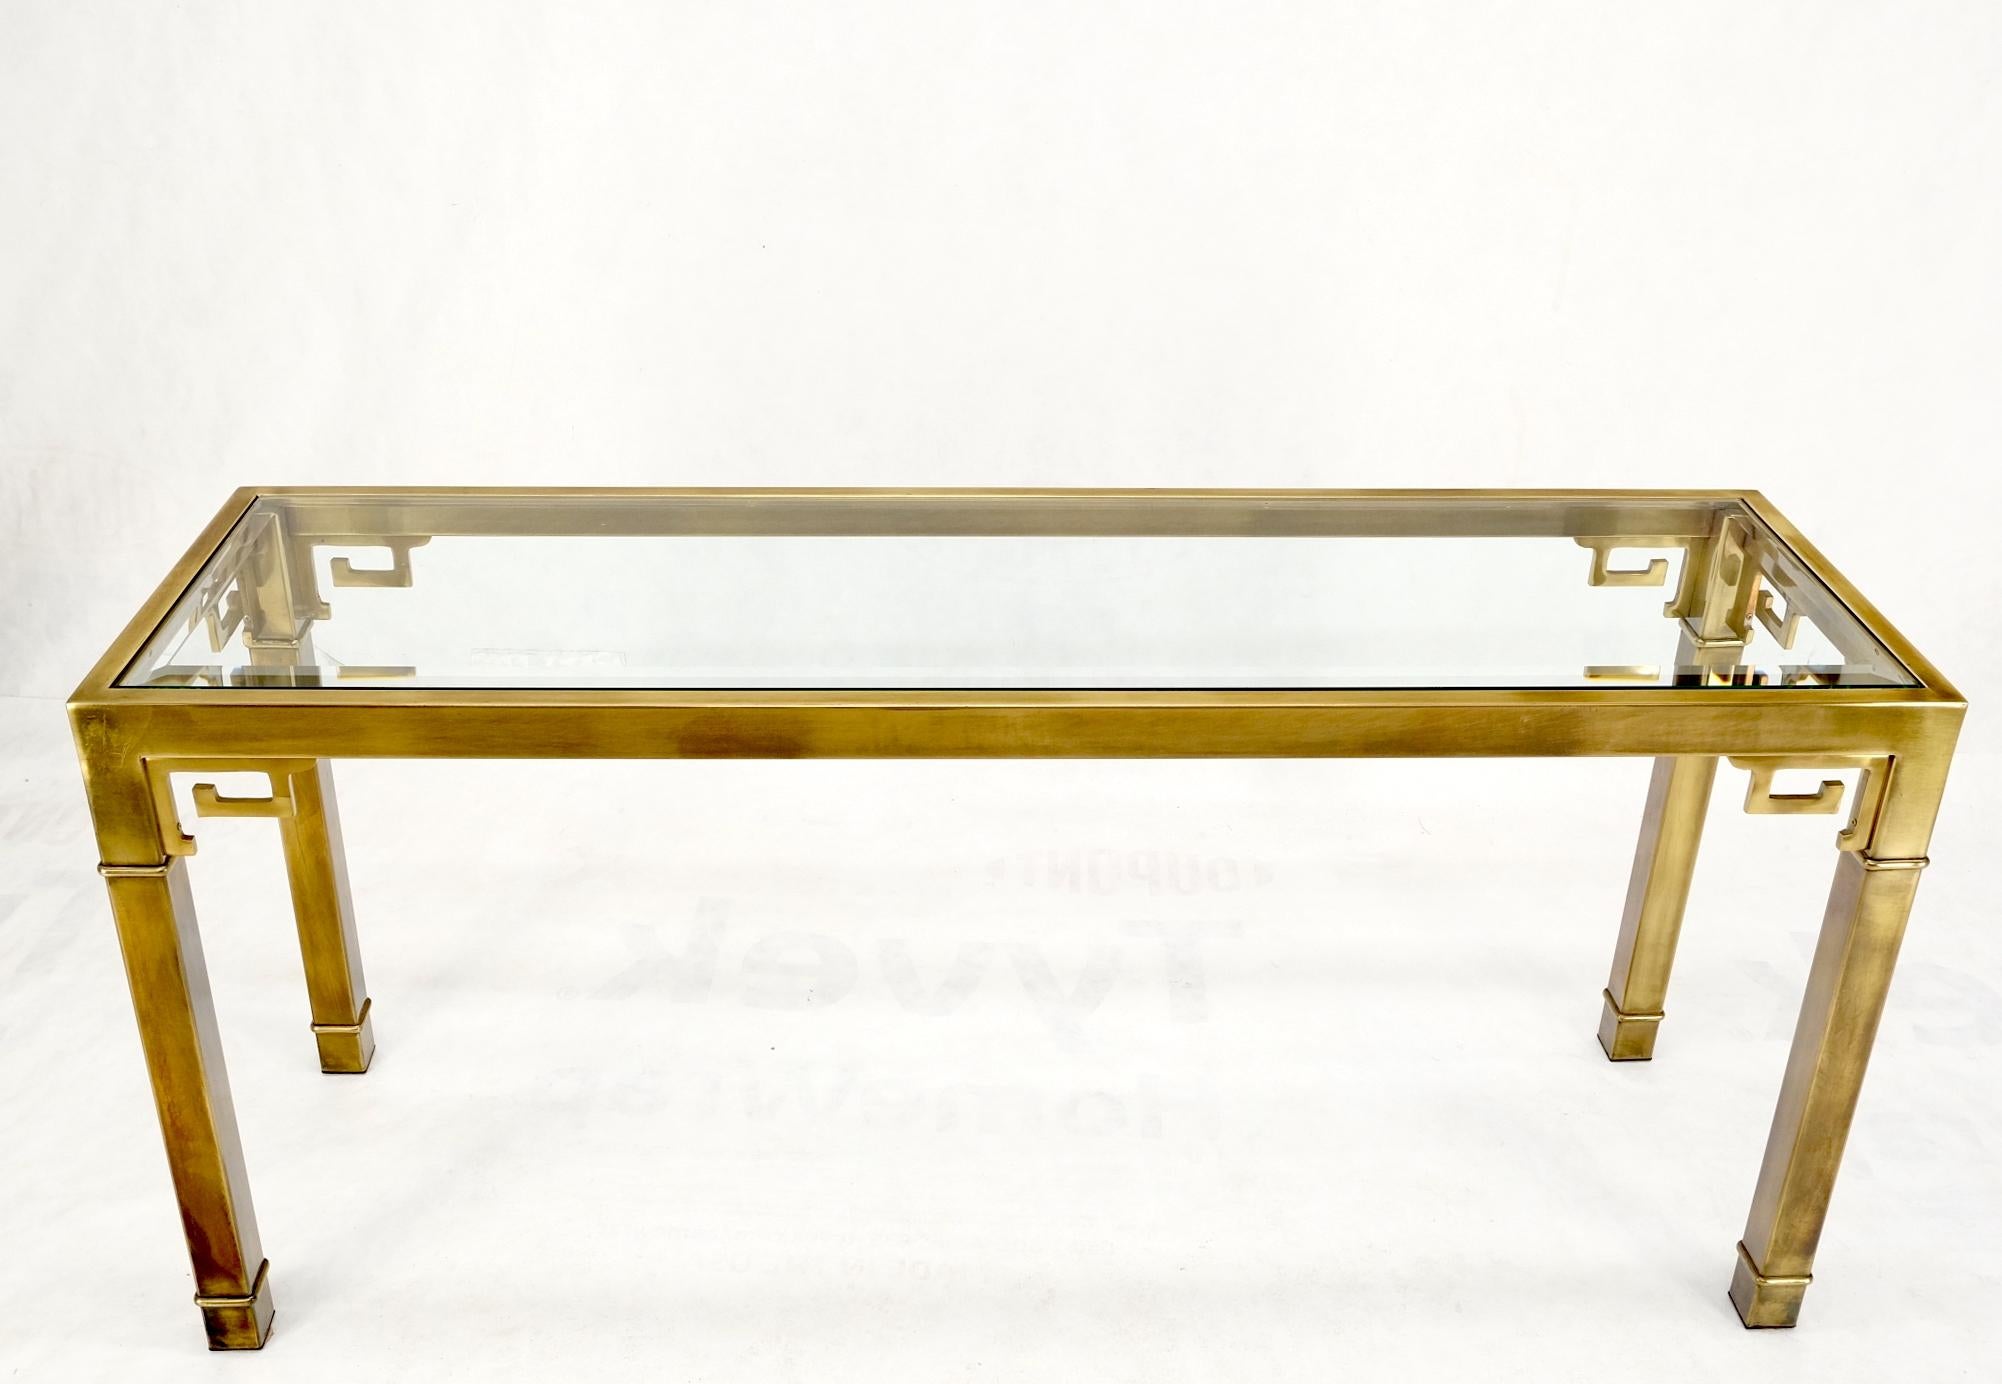 Greek Key Glass Top Mastercraft Solid Square Brass Profile Console Sofa Table 1